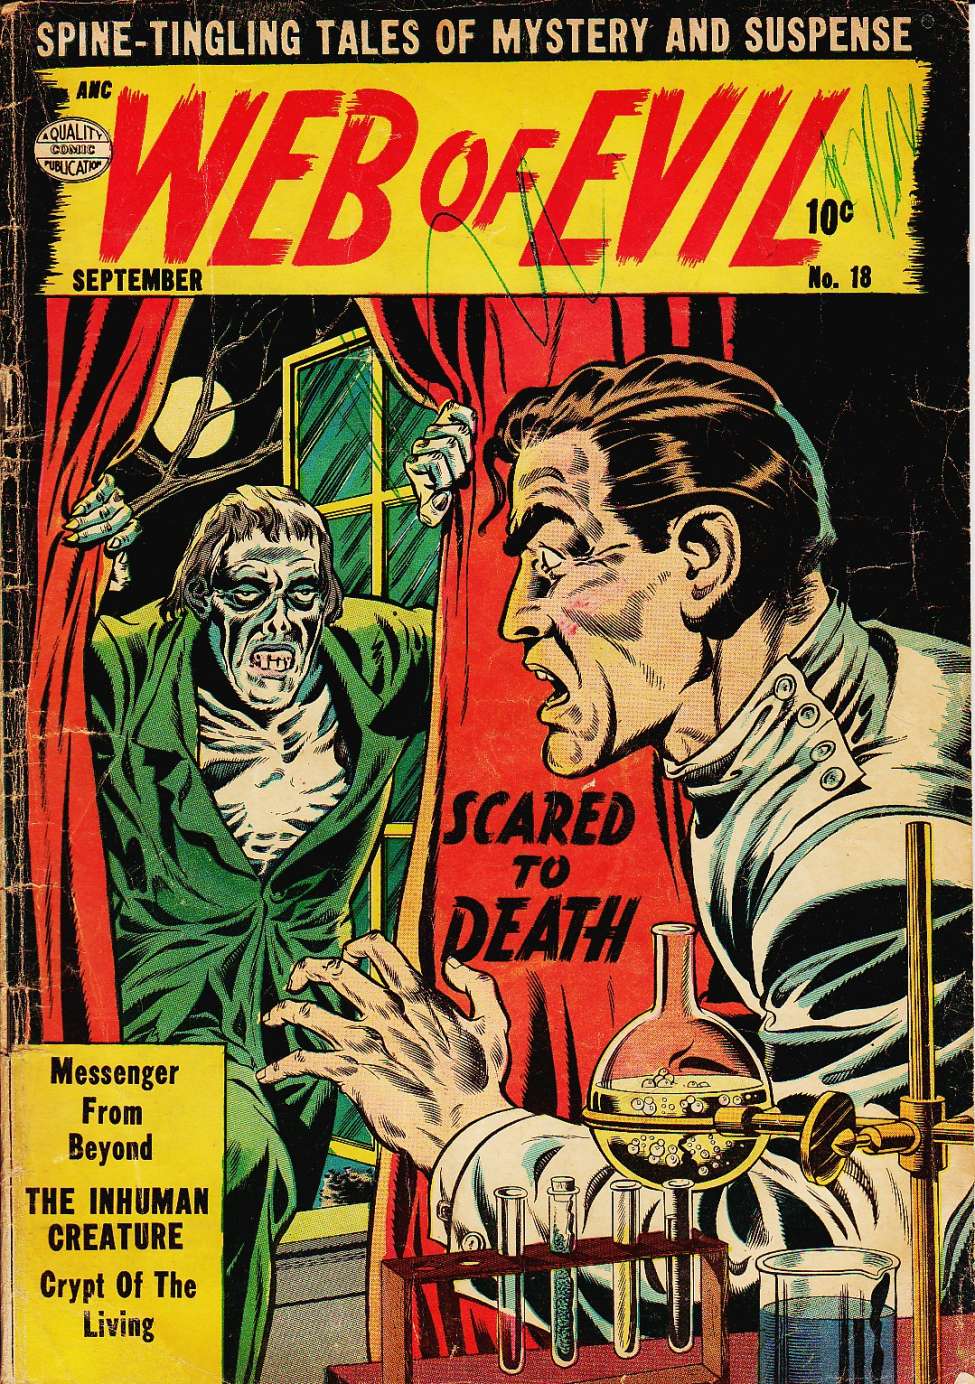 Comic Book Cover For Web of Evil 18